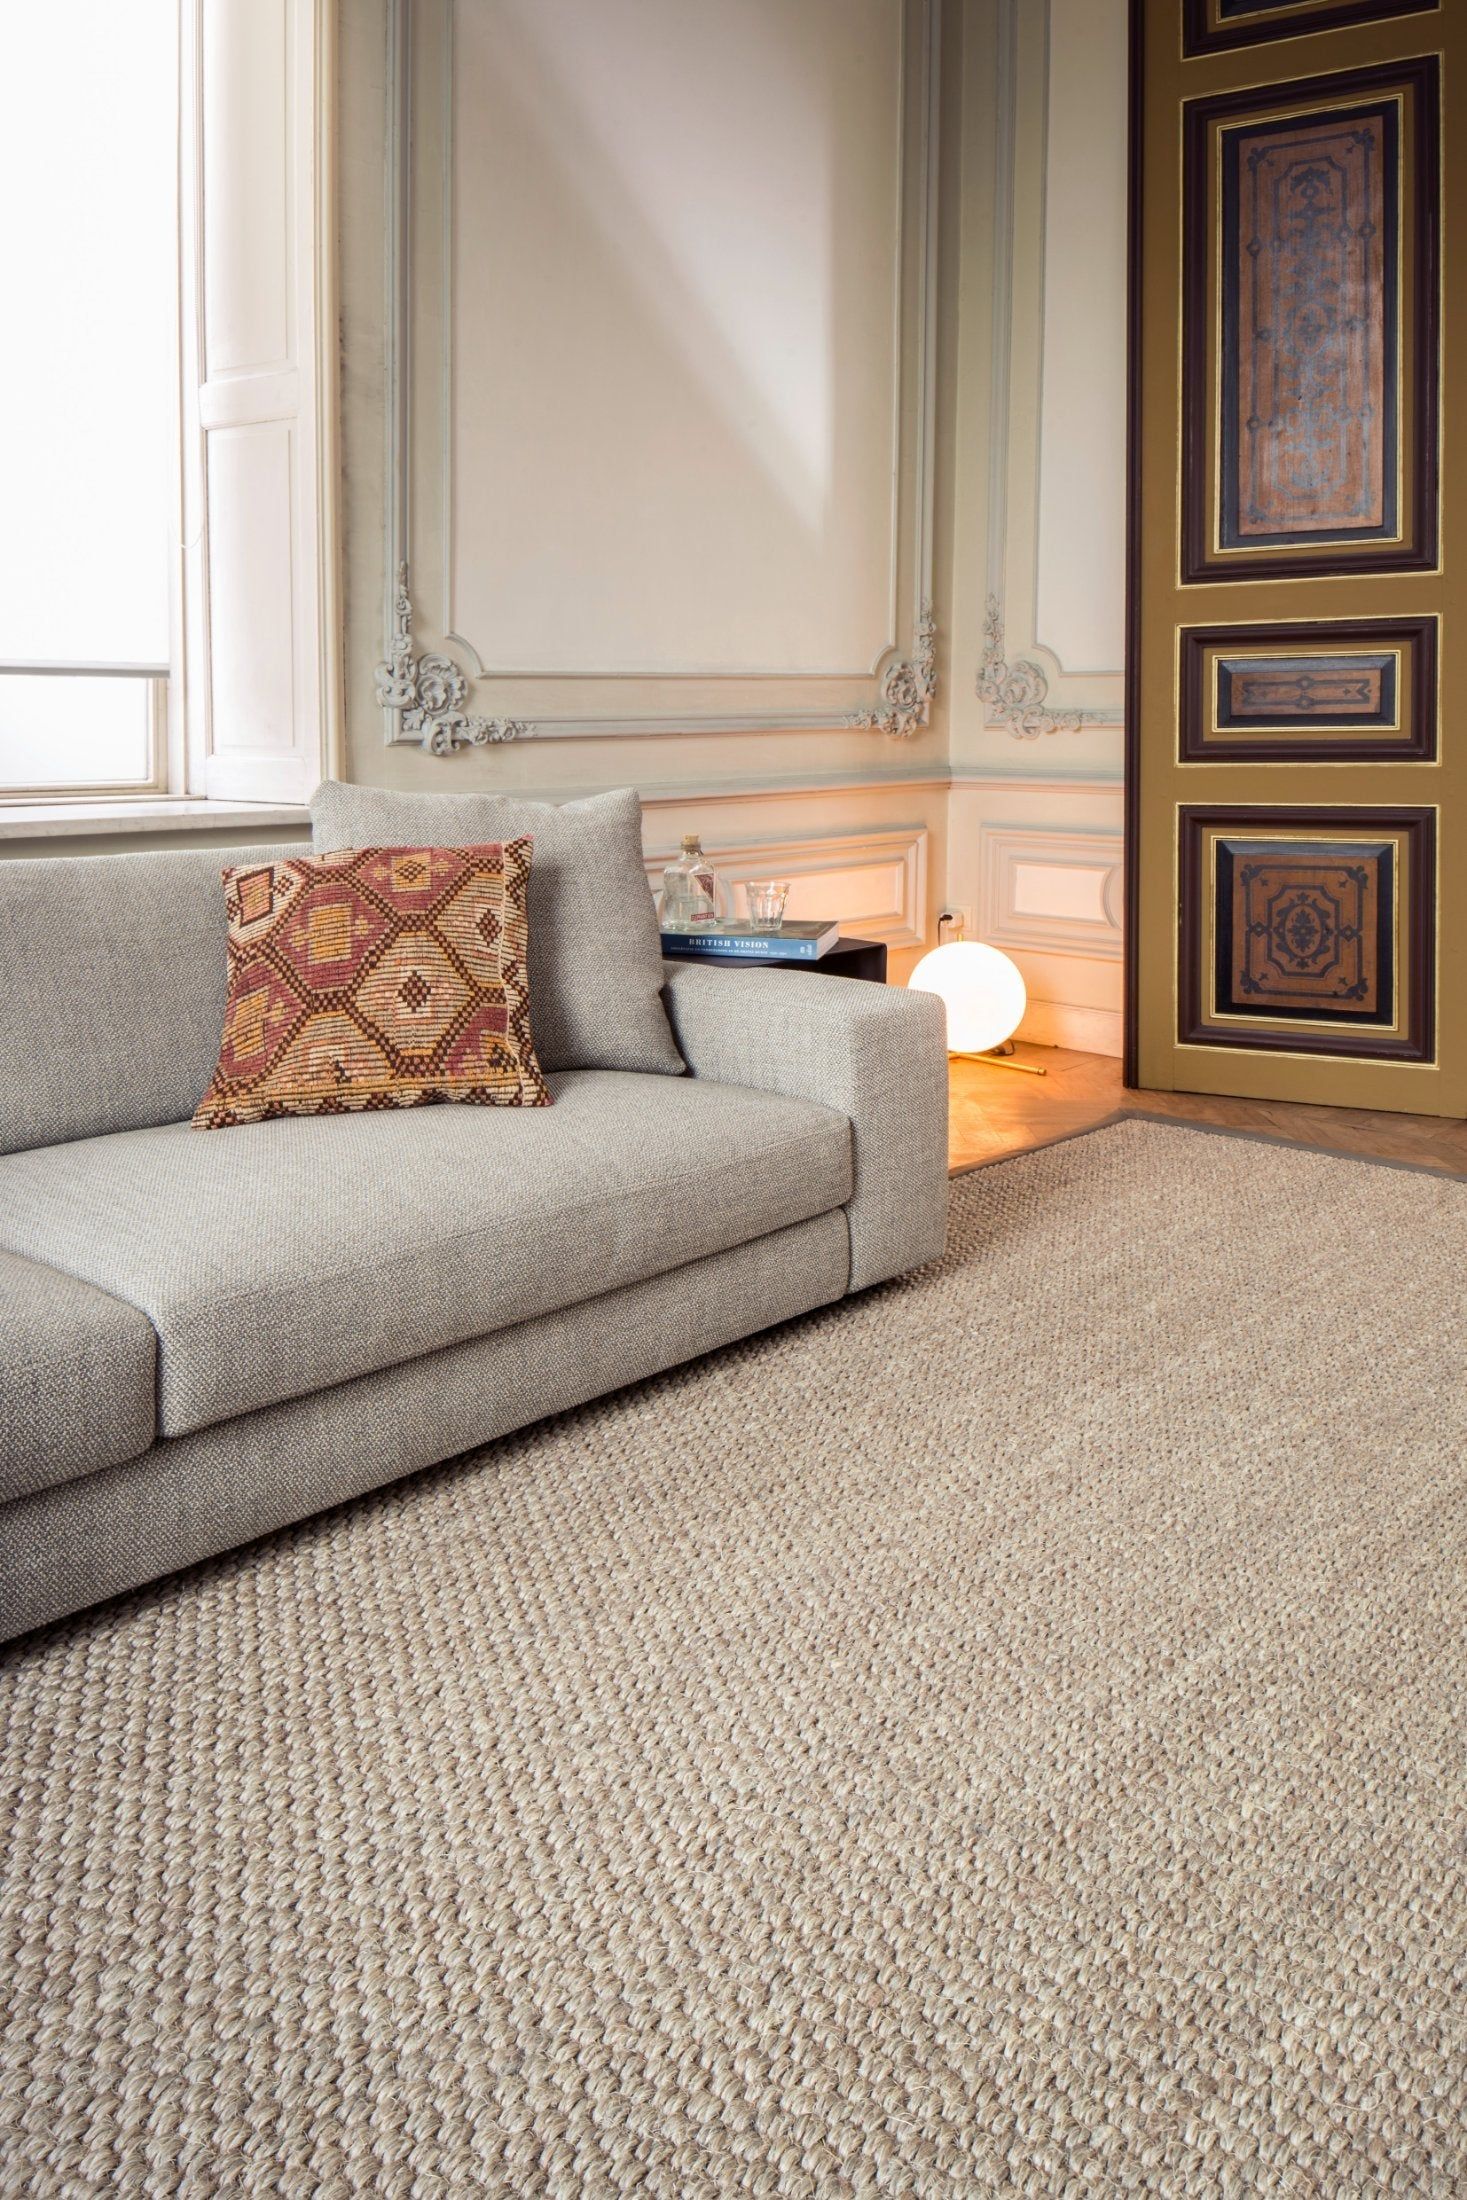 How to Care for and Maintain Your Sisal
Rug